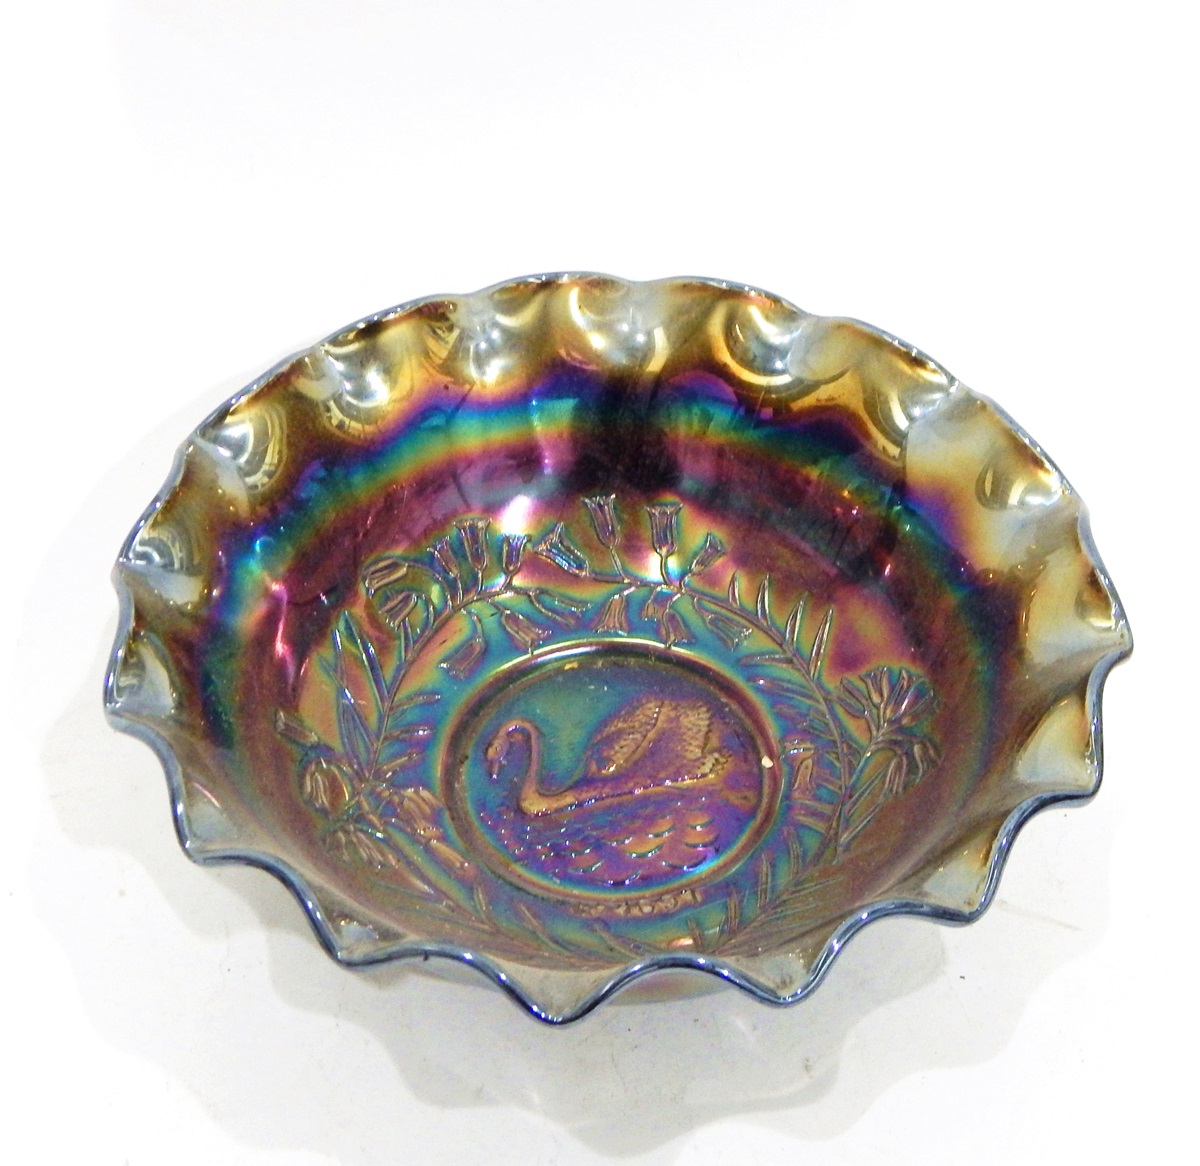 Three carnival glass dishes by Fenton, decorated with the 'Peacock and Urn' pattern (one amethyst, - Image 2 of 7